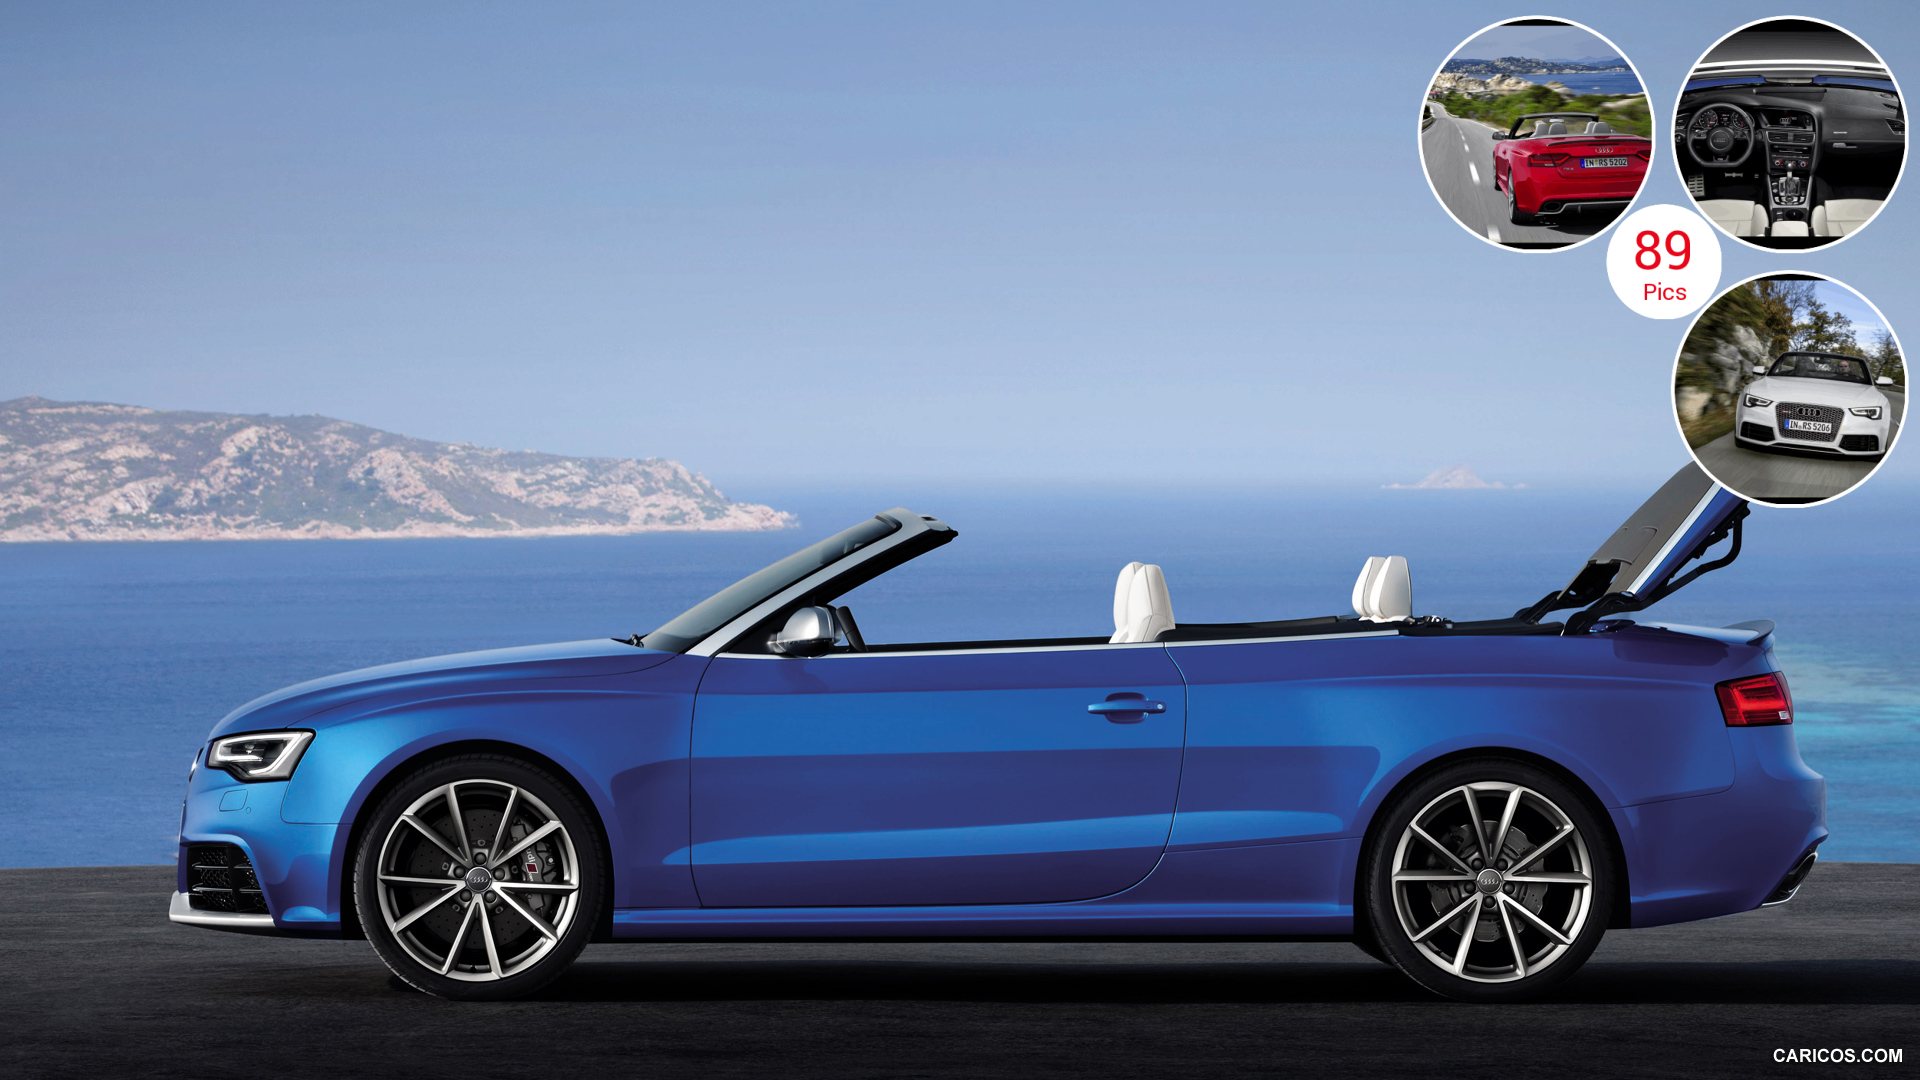 2014 Audi Rs5 Cabriolet 20 Top In Action Side Wallpaper - Jaguar 5 Seater Convertible , HD Wallpaper & Backgrounds